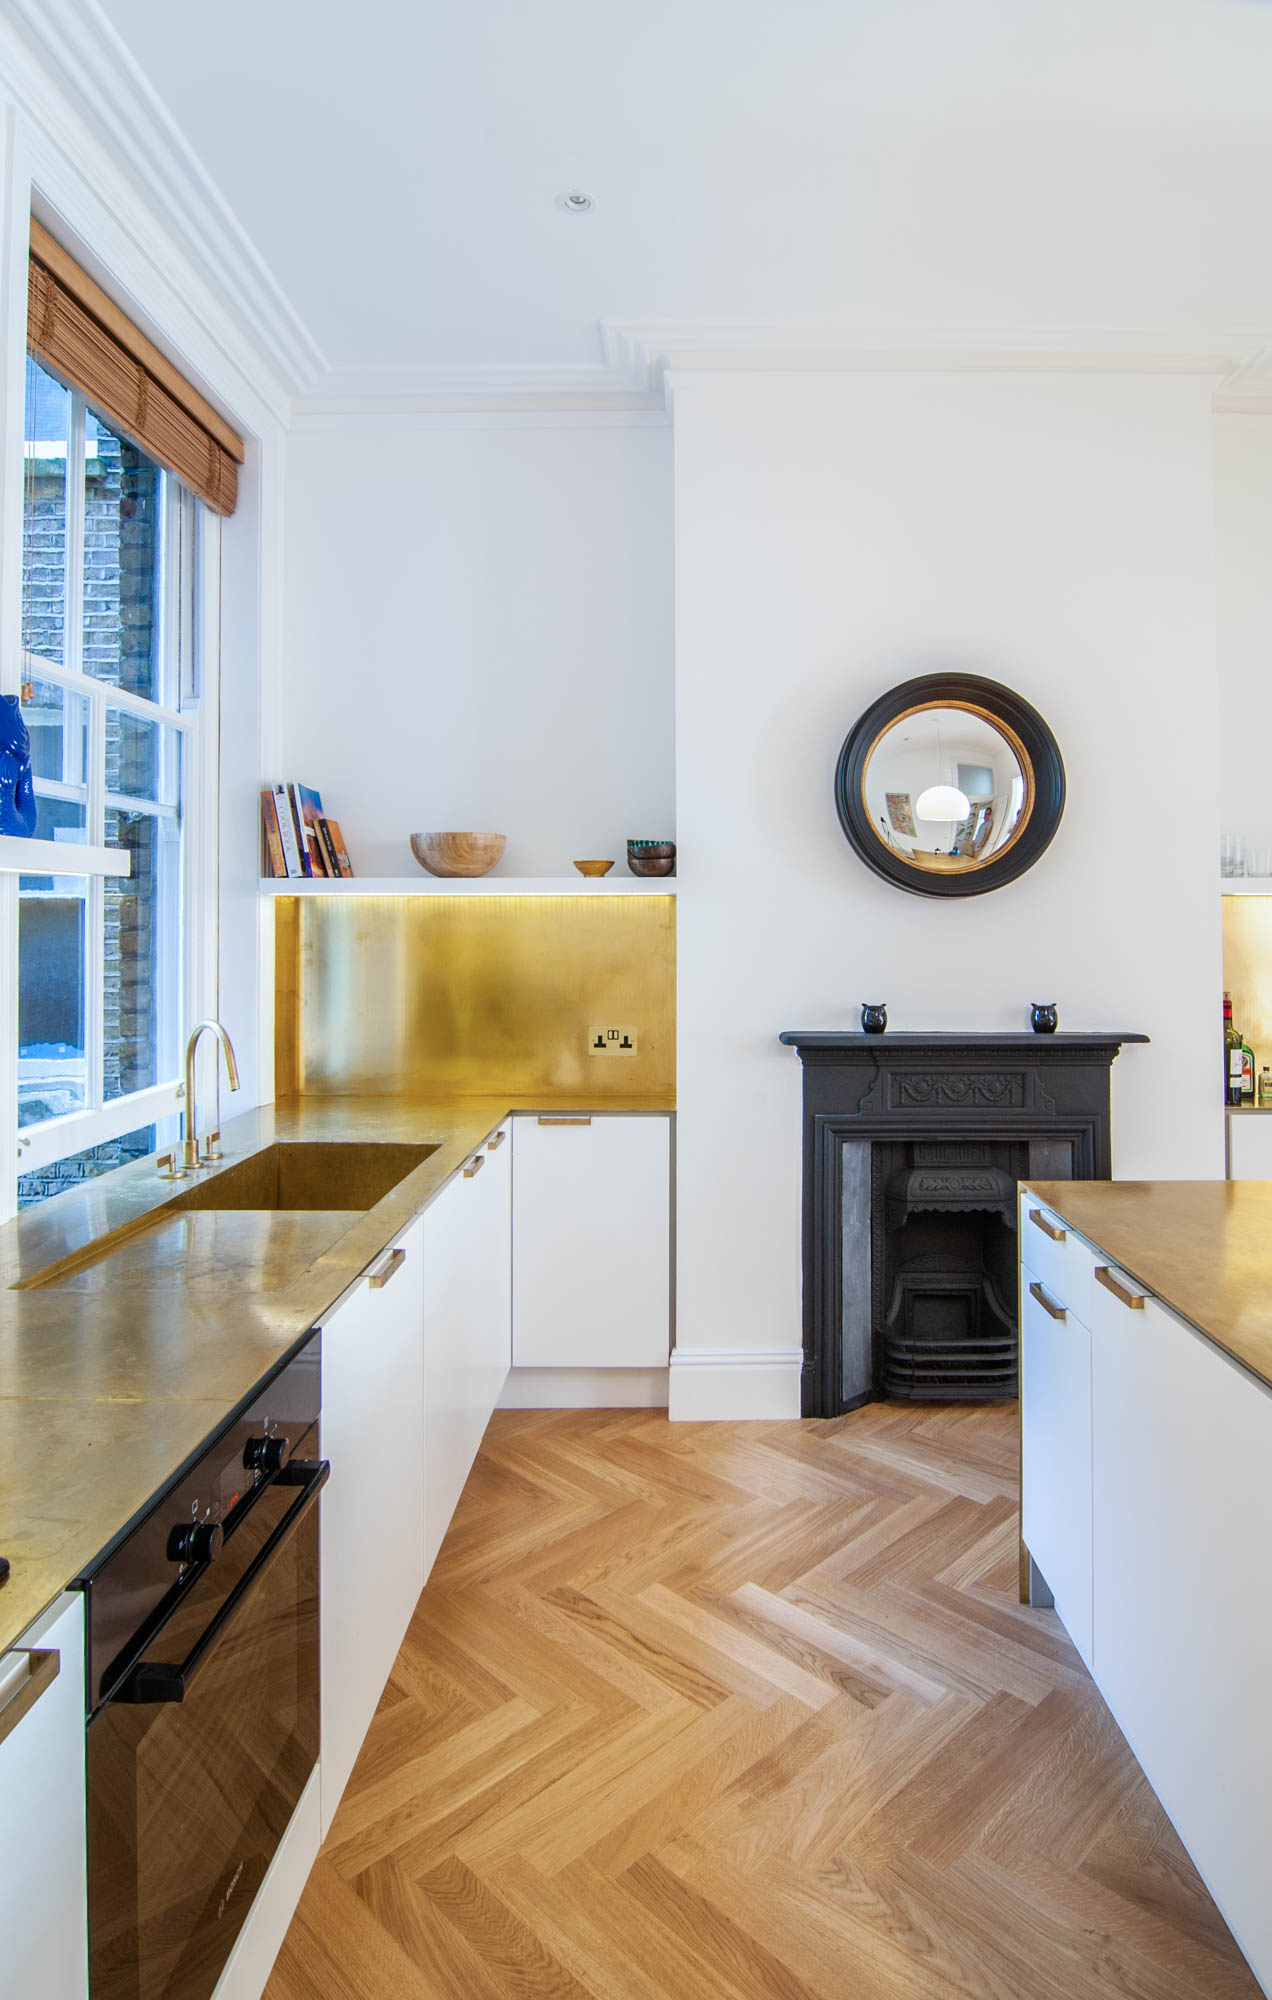 Beautiful brass gold worktops work perfectly with the parquet floors, white cabinets and black fireplace.